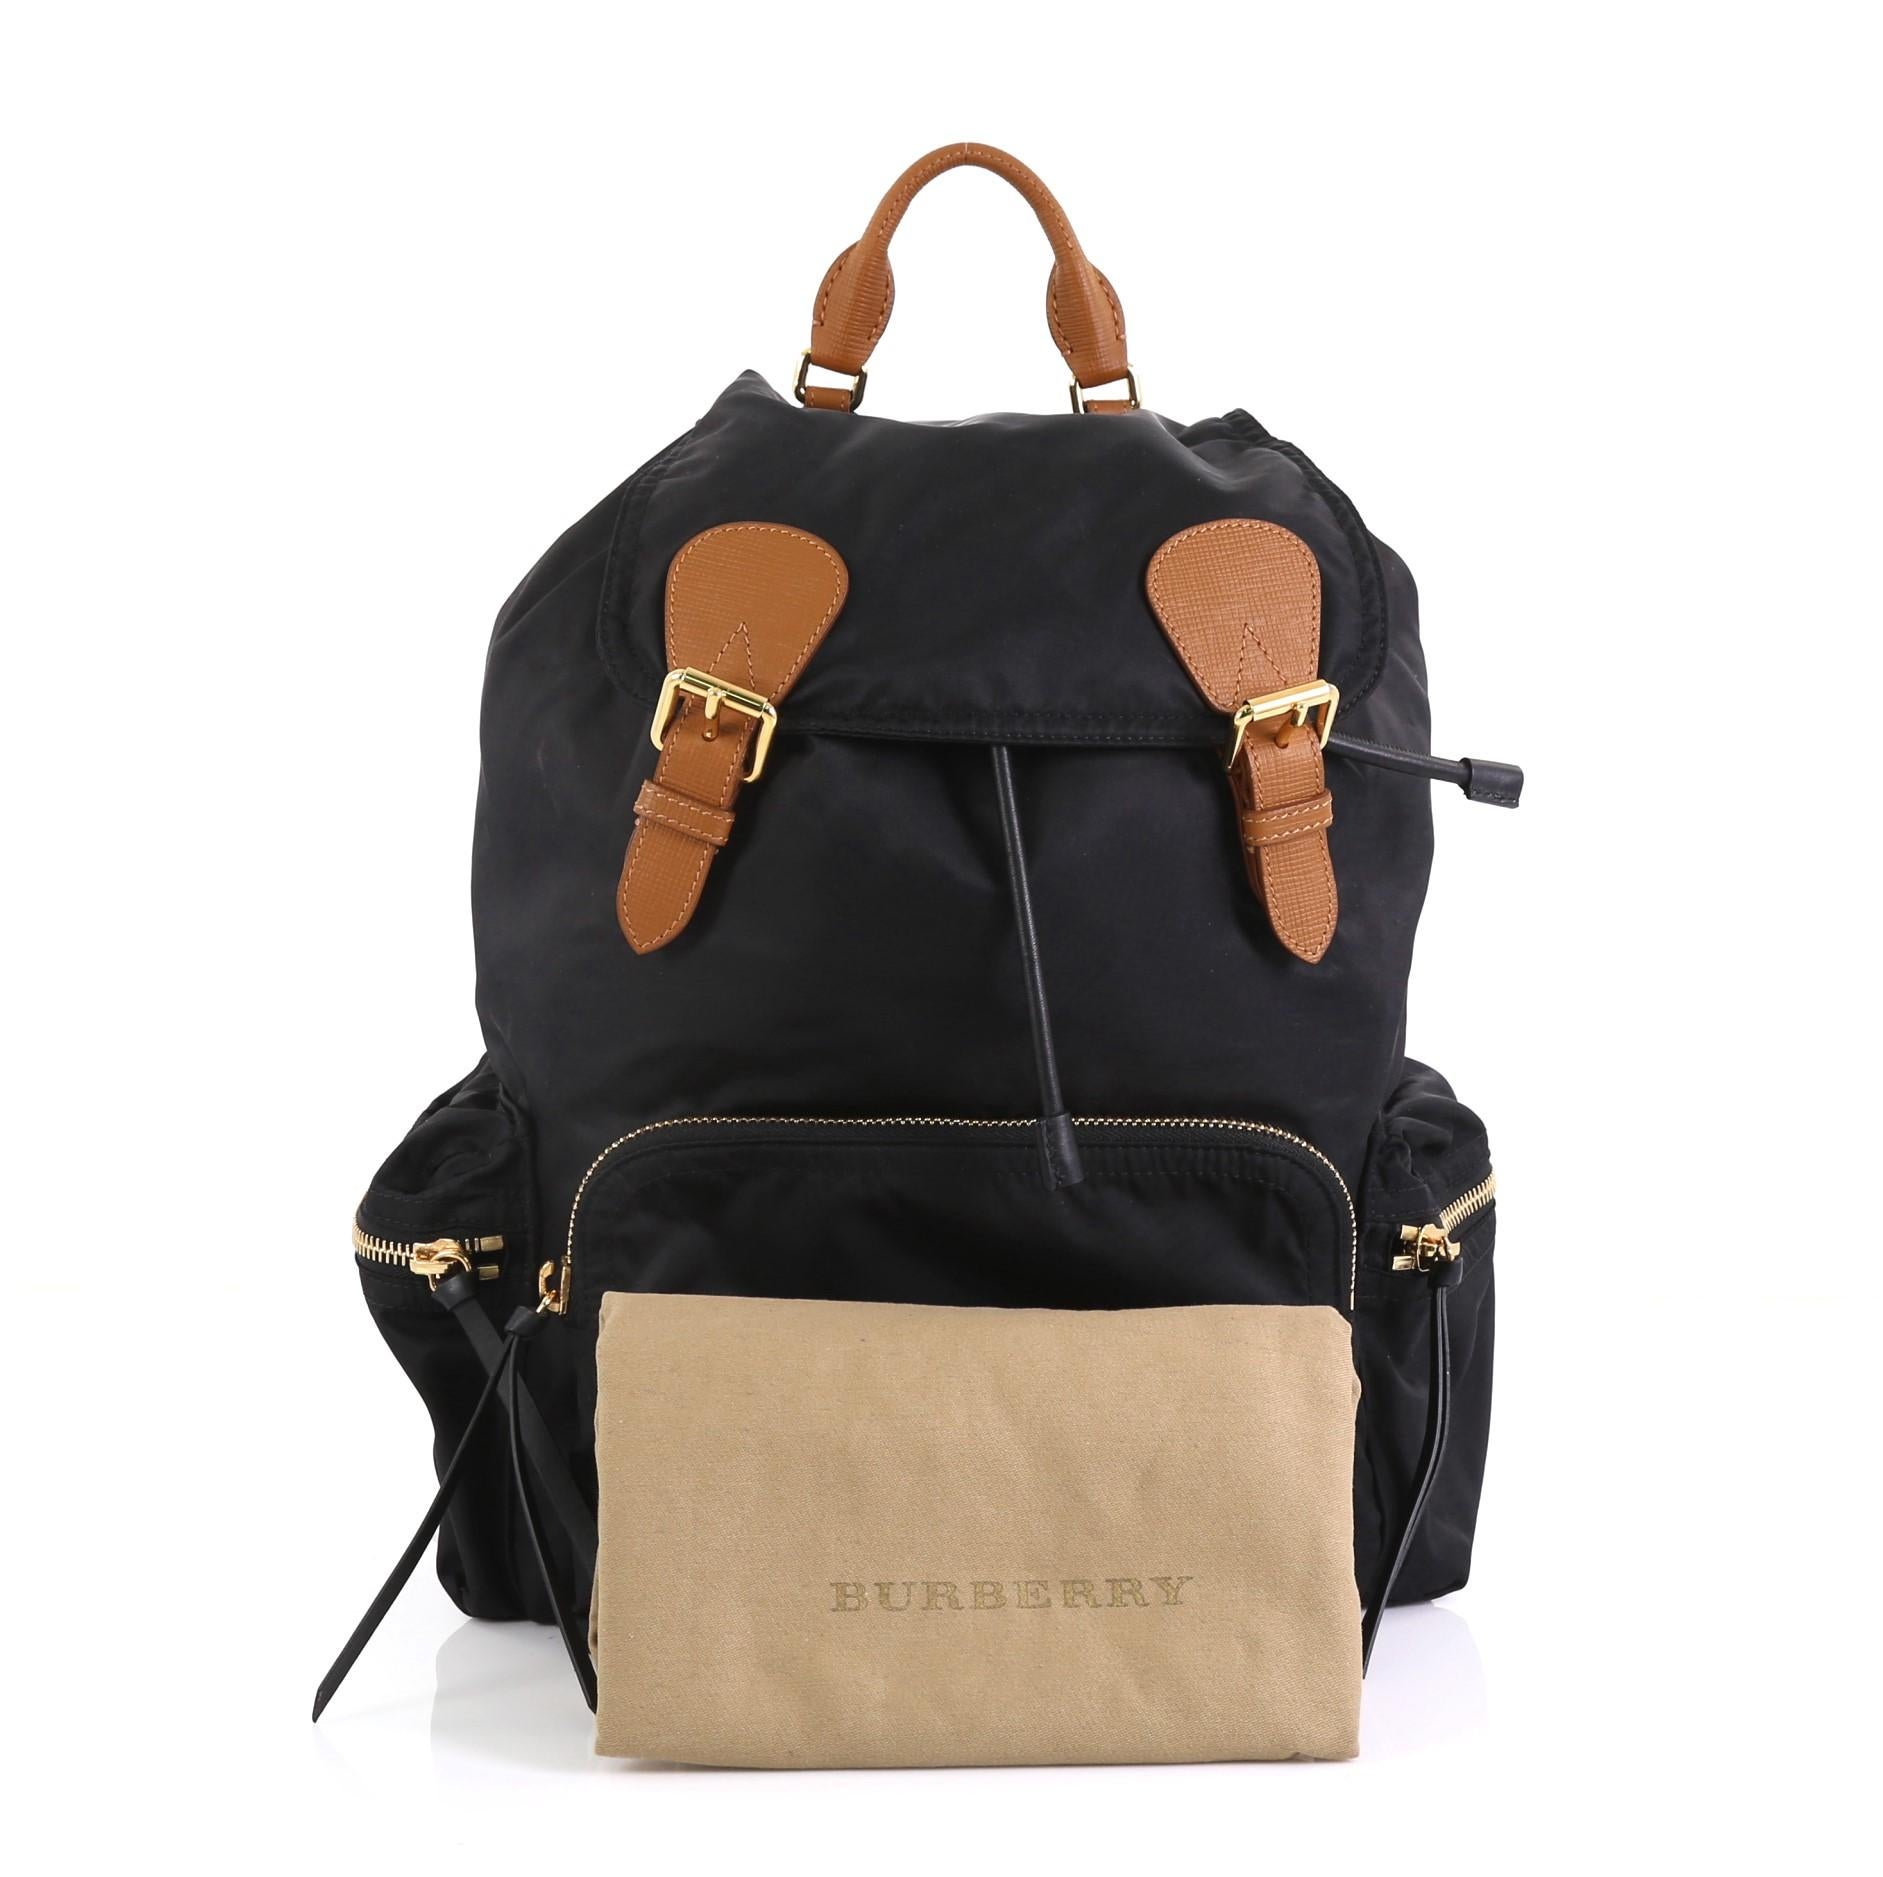 This Burberry Rucksack Backpack Nylon with Leather Large, crafted from black nylon, features a leather top handle, adjustable shoulder straps, exterior zip pockets, quilted back panel, and gold-tone hardware. Its drawstring under snap-tab flap